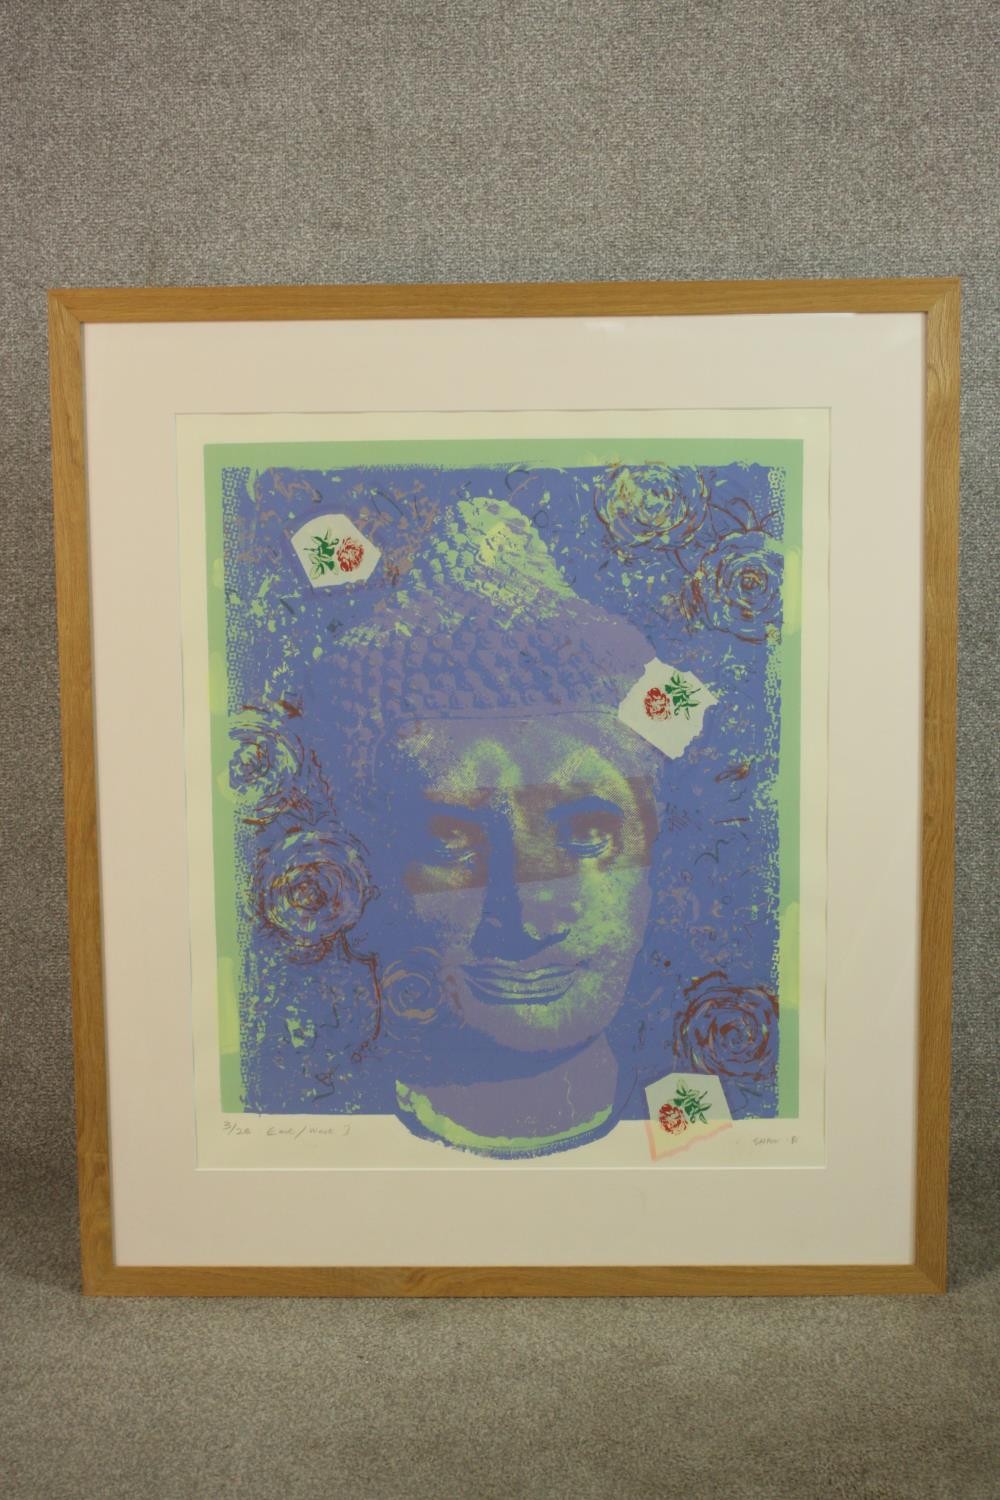 David Shaw (20th century), East/West, an original limited edition linocut 3/28, signed and framed. - Image 2 of 7